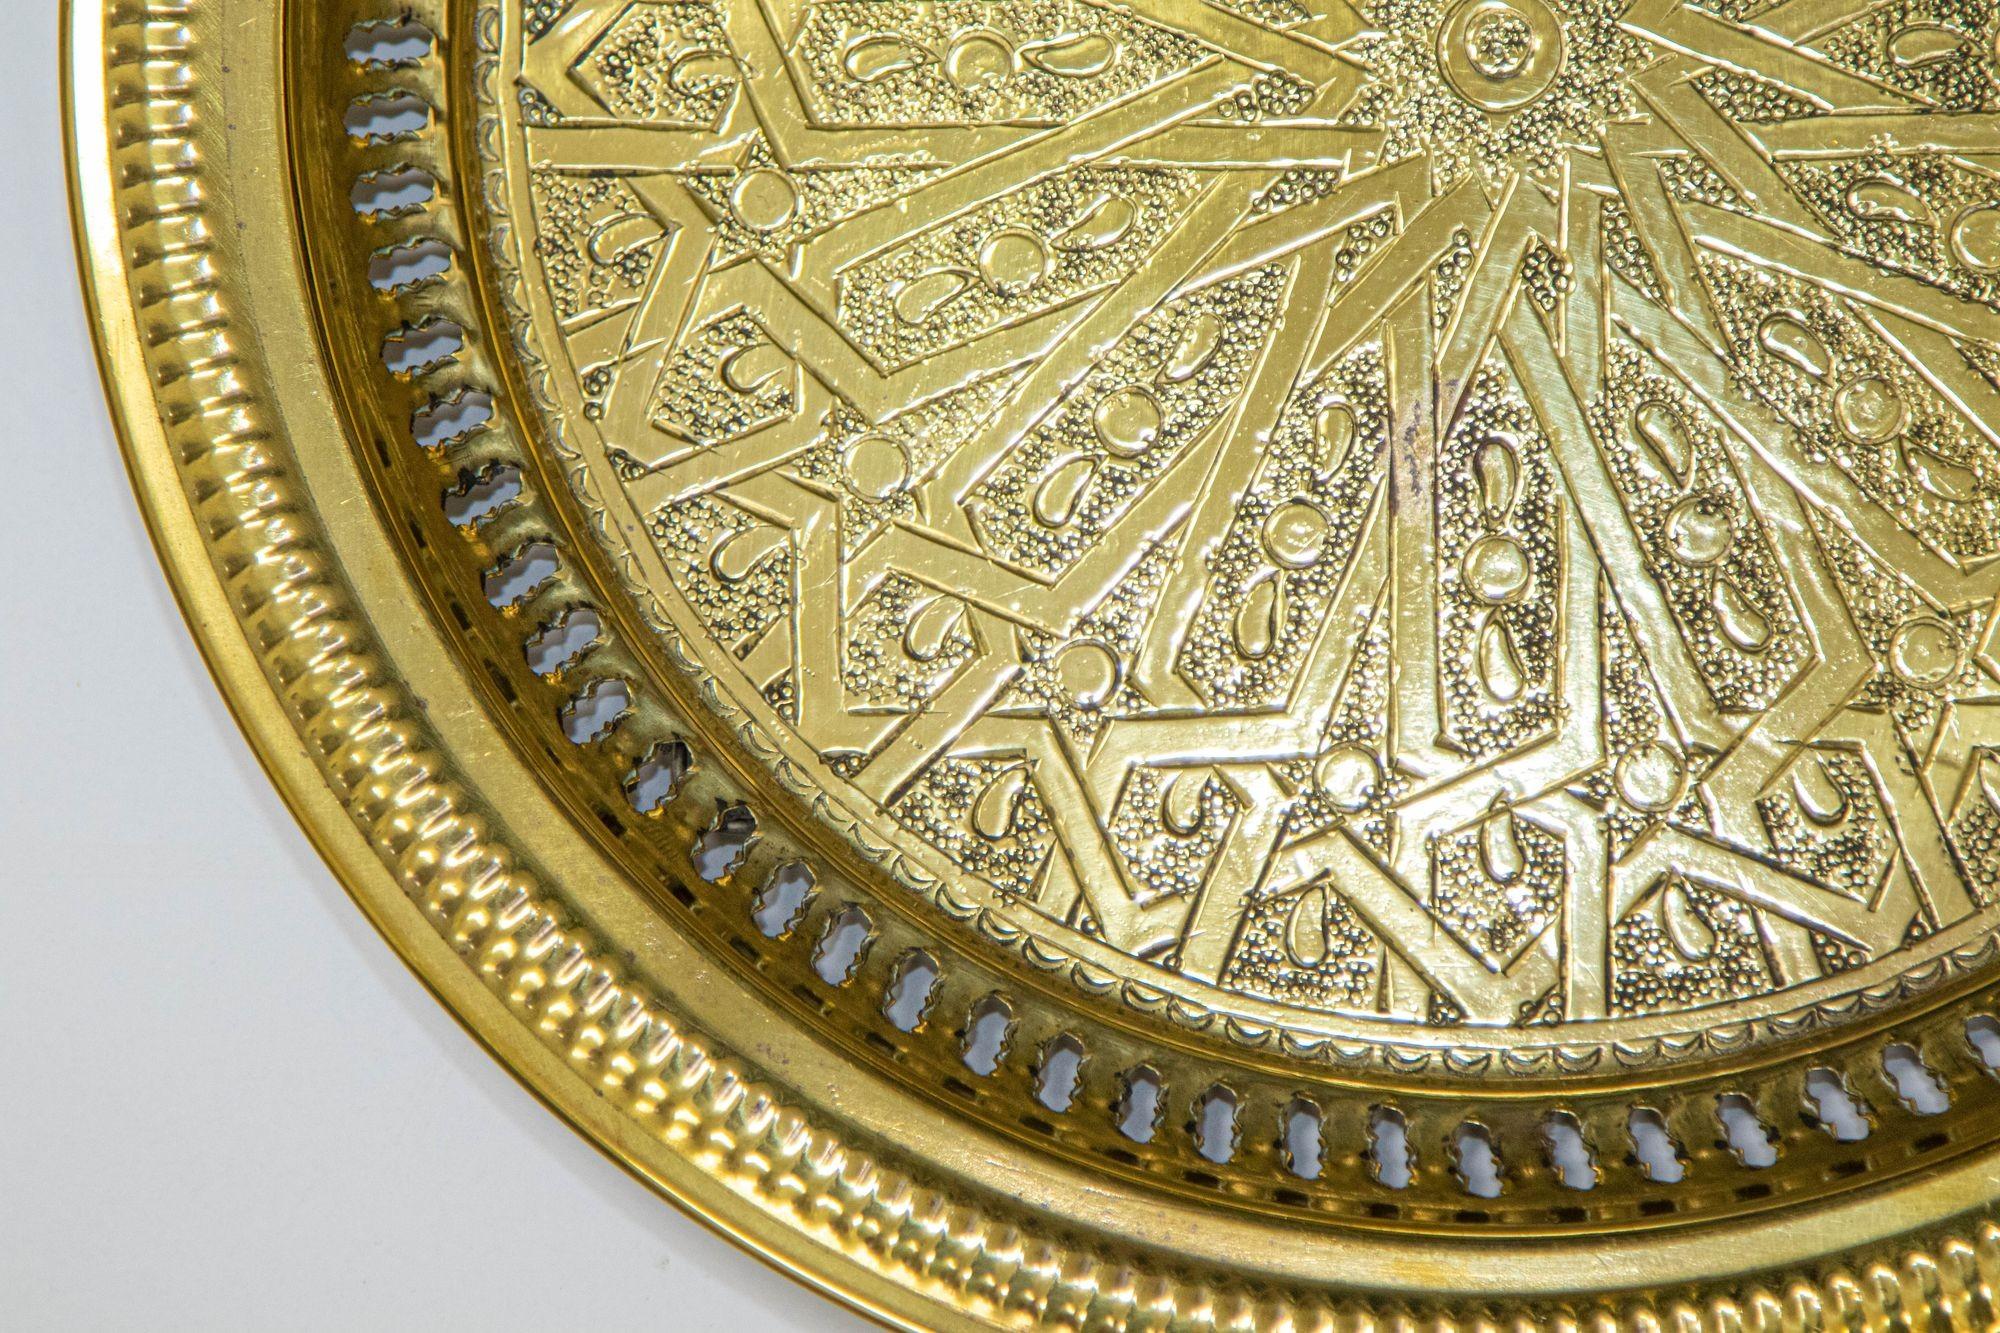 The hand-hammered brass Moroccan tray with fine intricate Islamic design is a stunning piece of craftsmanship that exudes the beauty and intricacy of Moroccan artistry. This exquisite tray showcases the rich cultural heritage and traditional